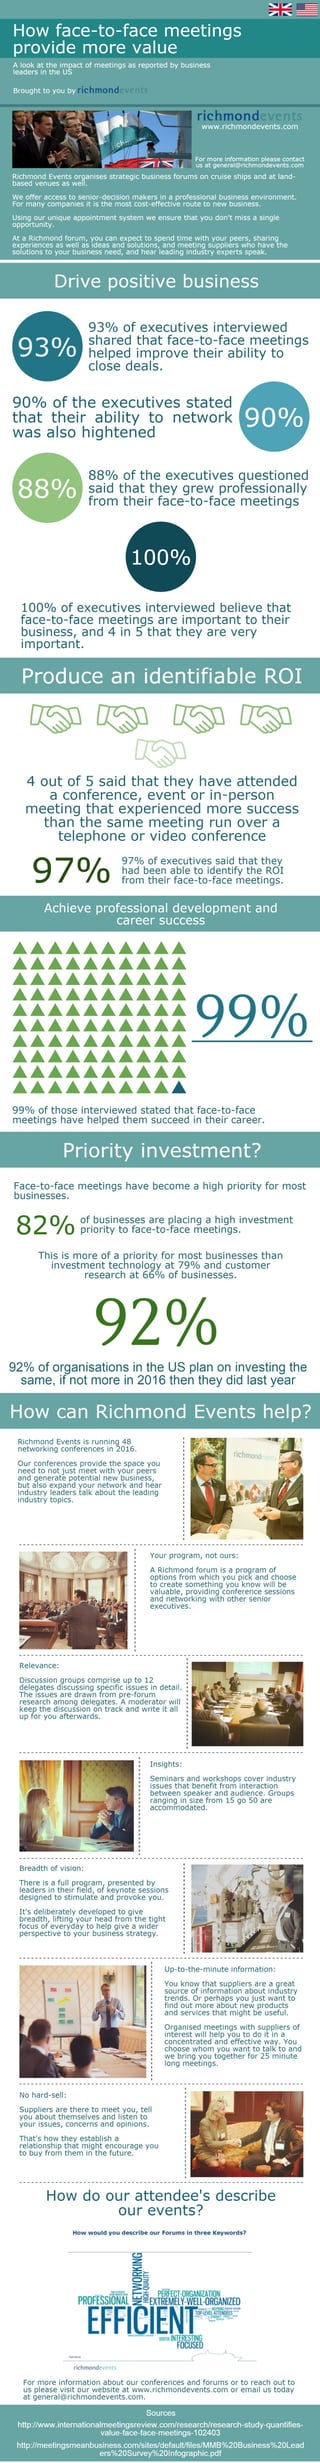 How face-to-face meetings provide more value